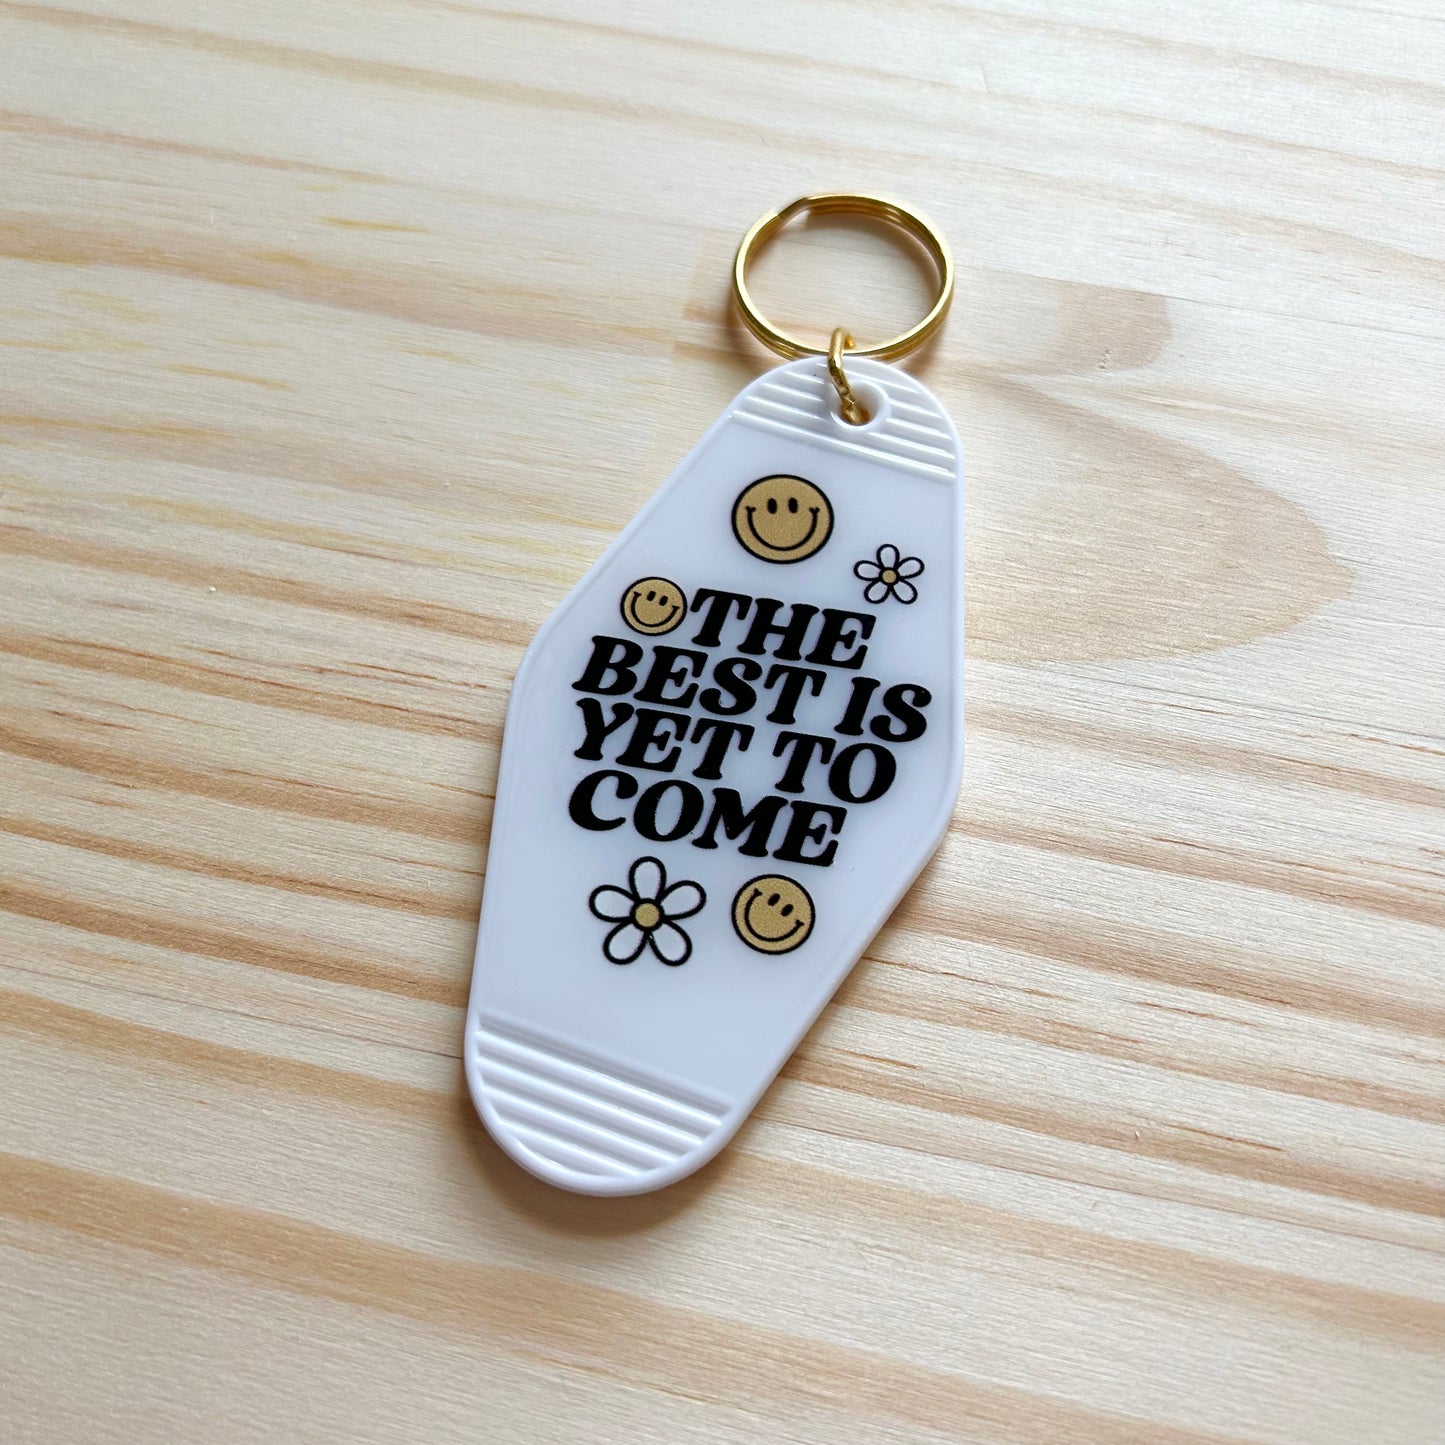 The Best is Yet to Come - Cute Motel Keychain